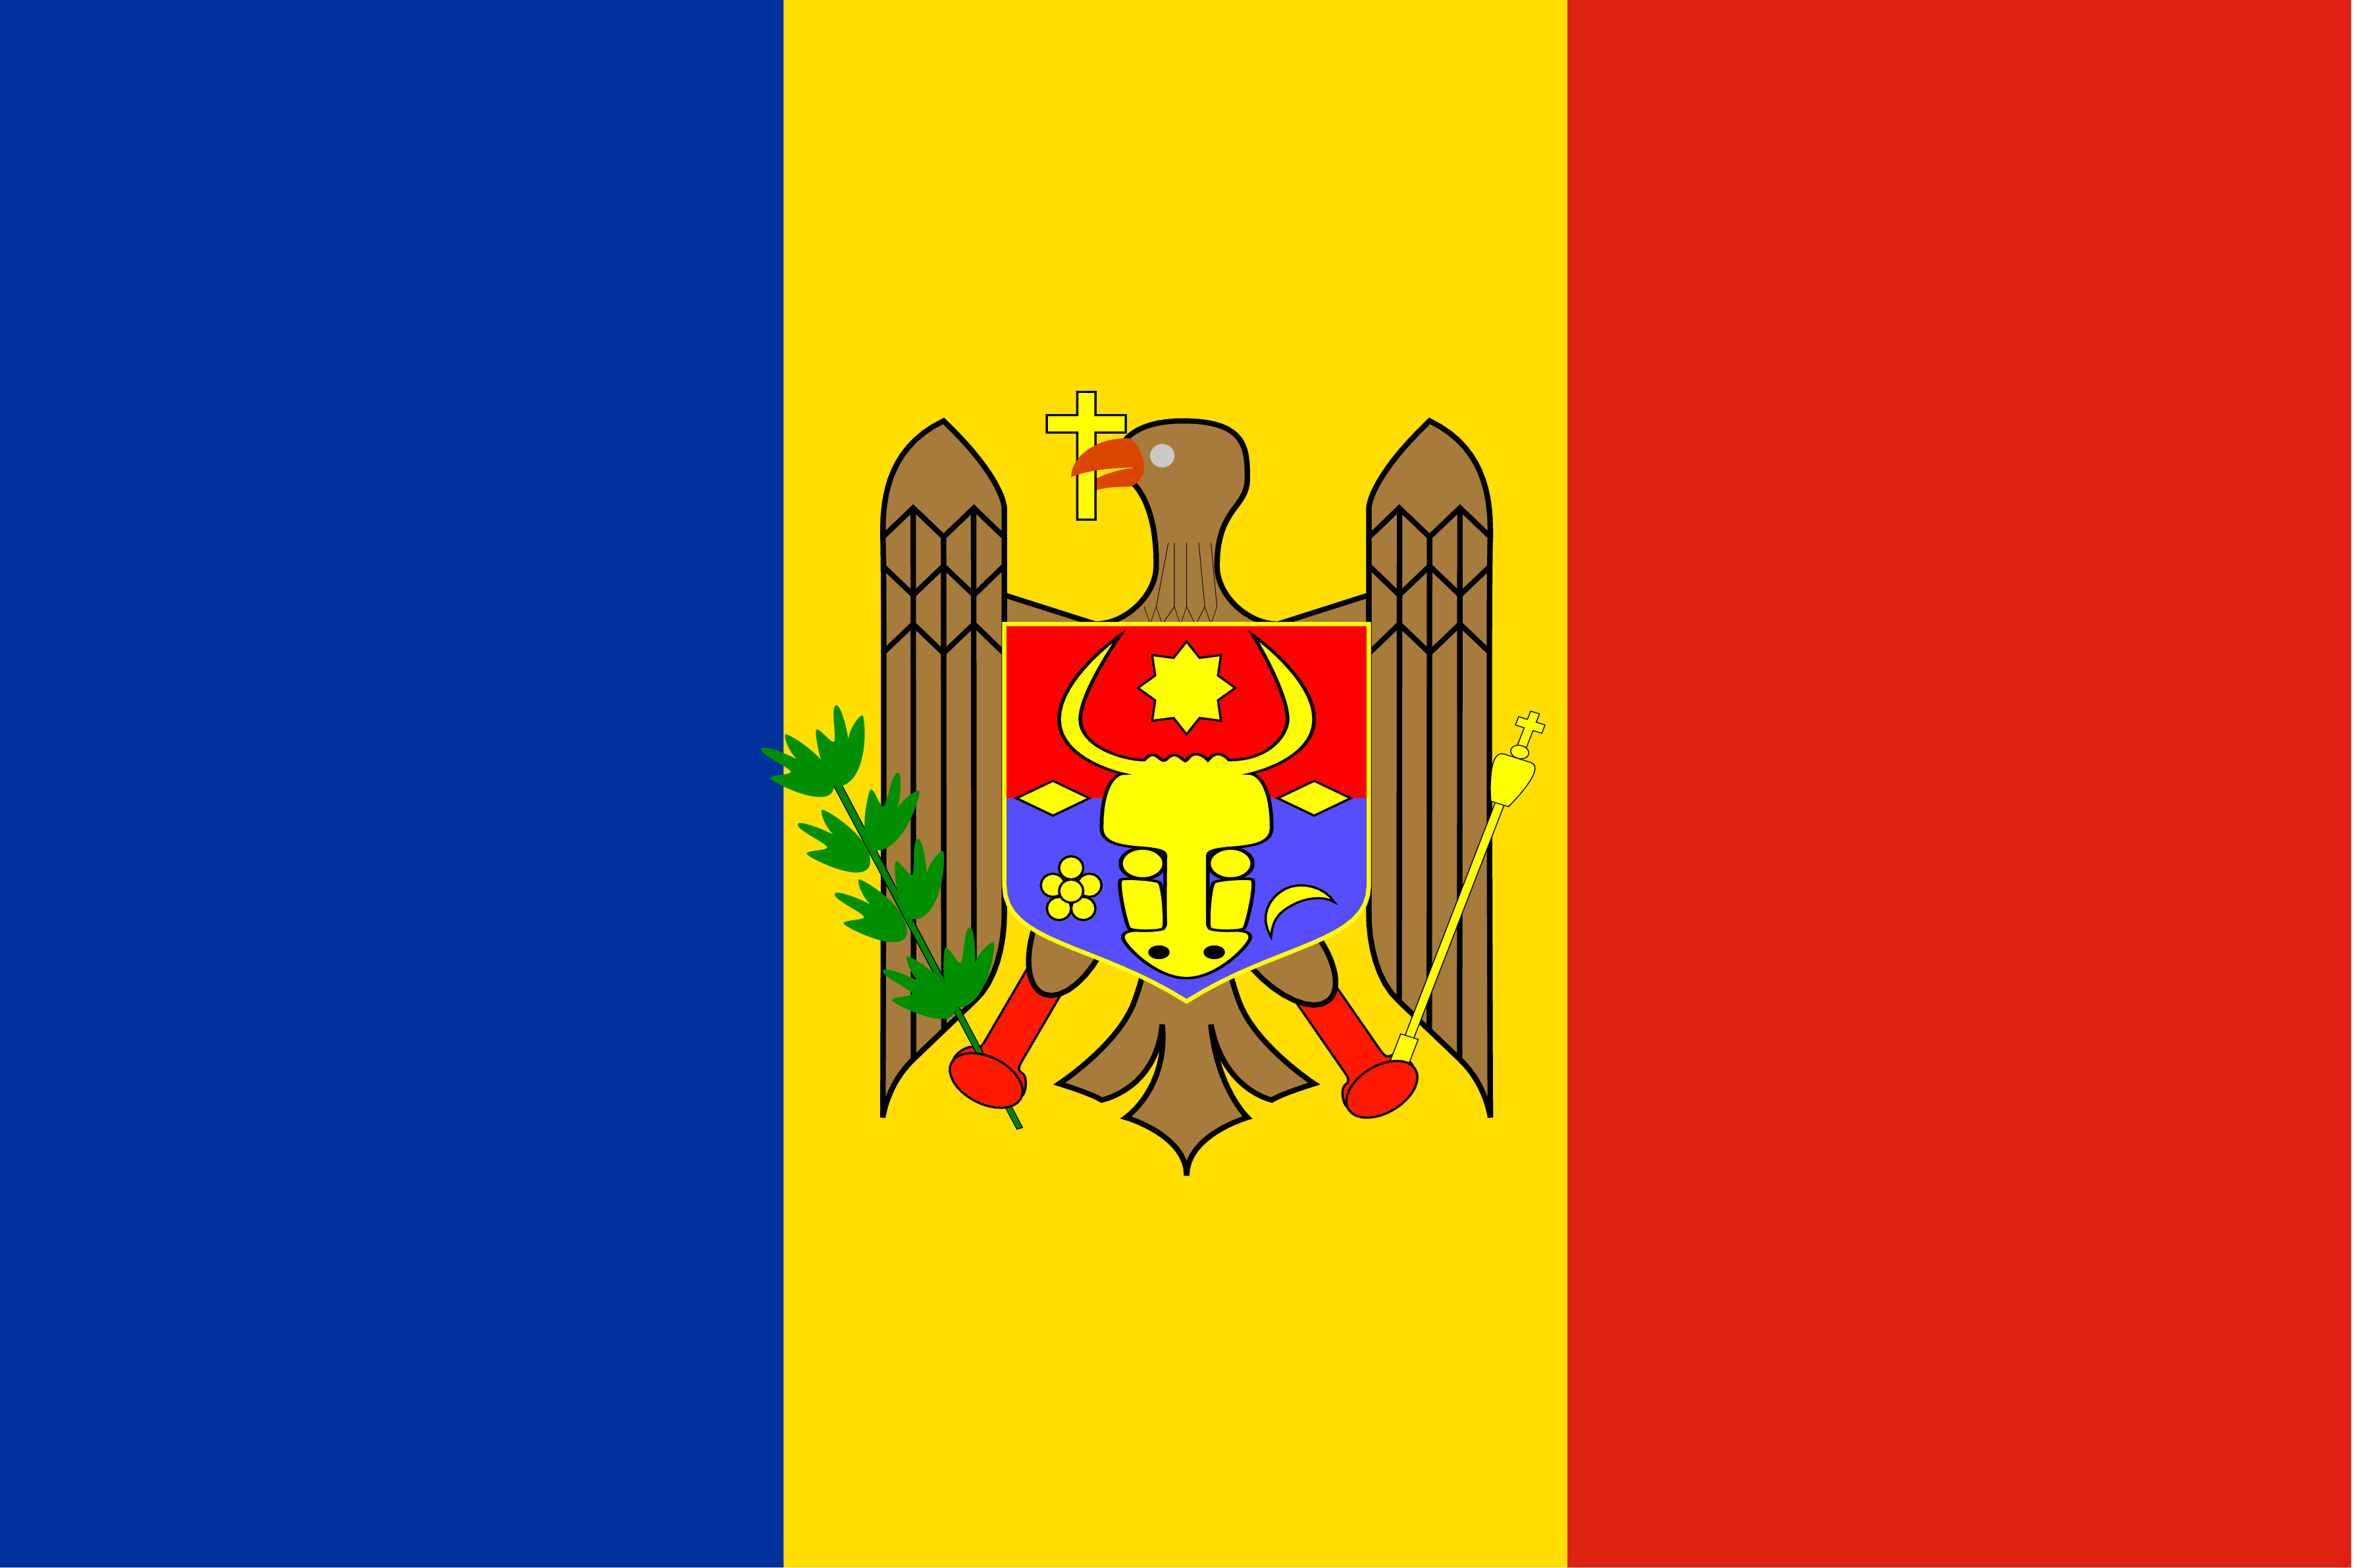 The Moldova flag was officially adopted on May 1990. Once part